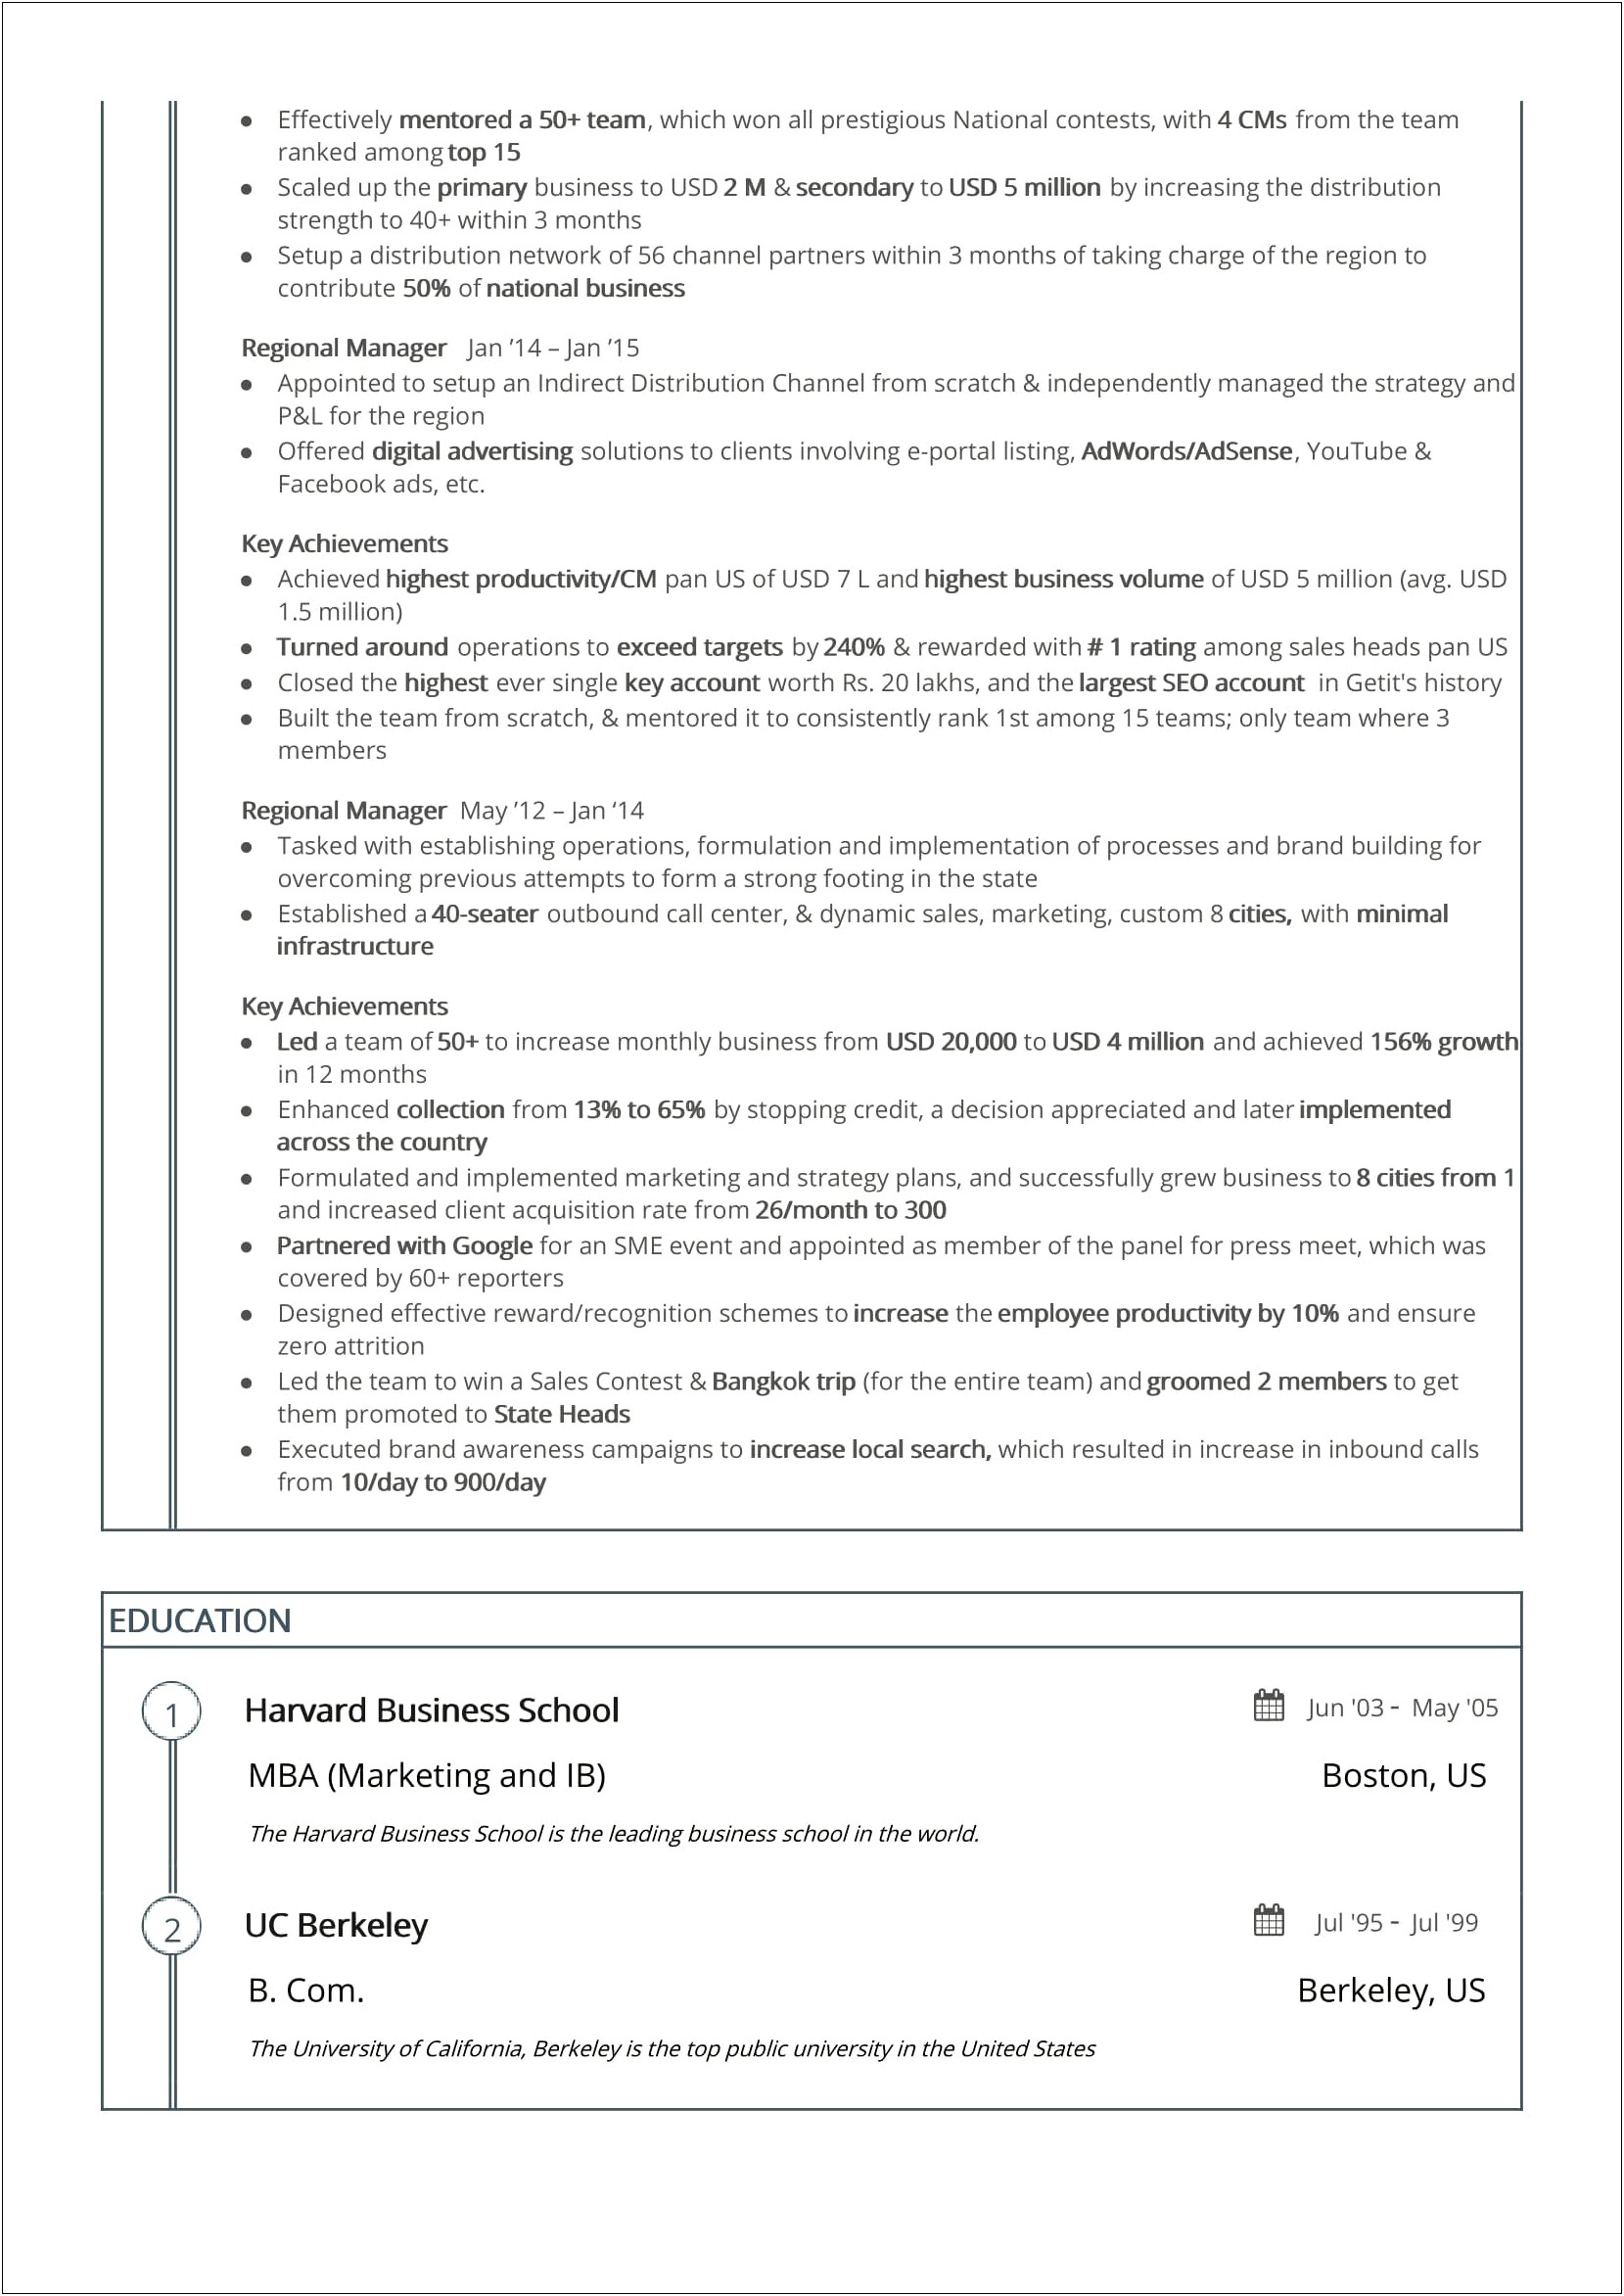 Two Page Resume That Focuses On Skills